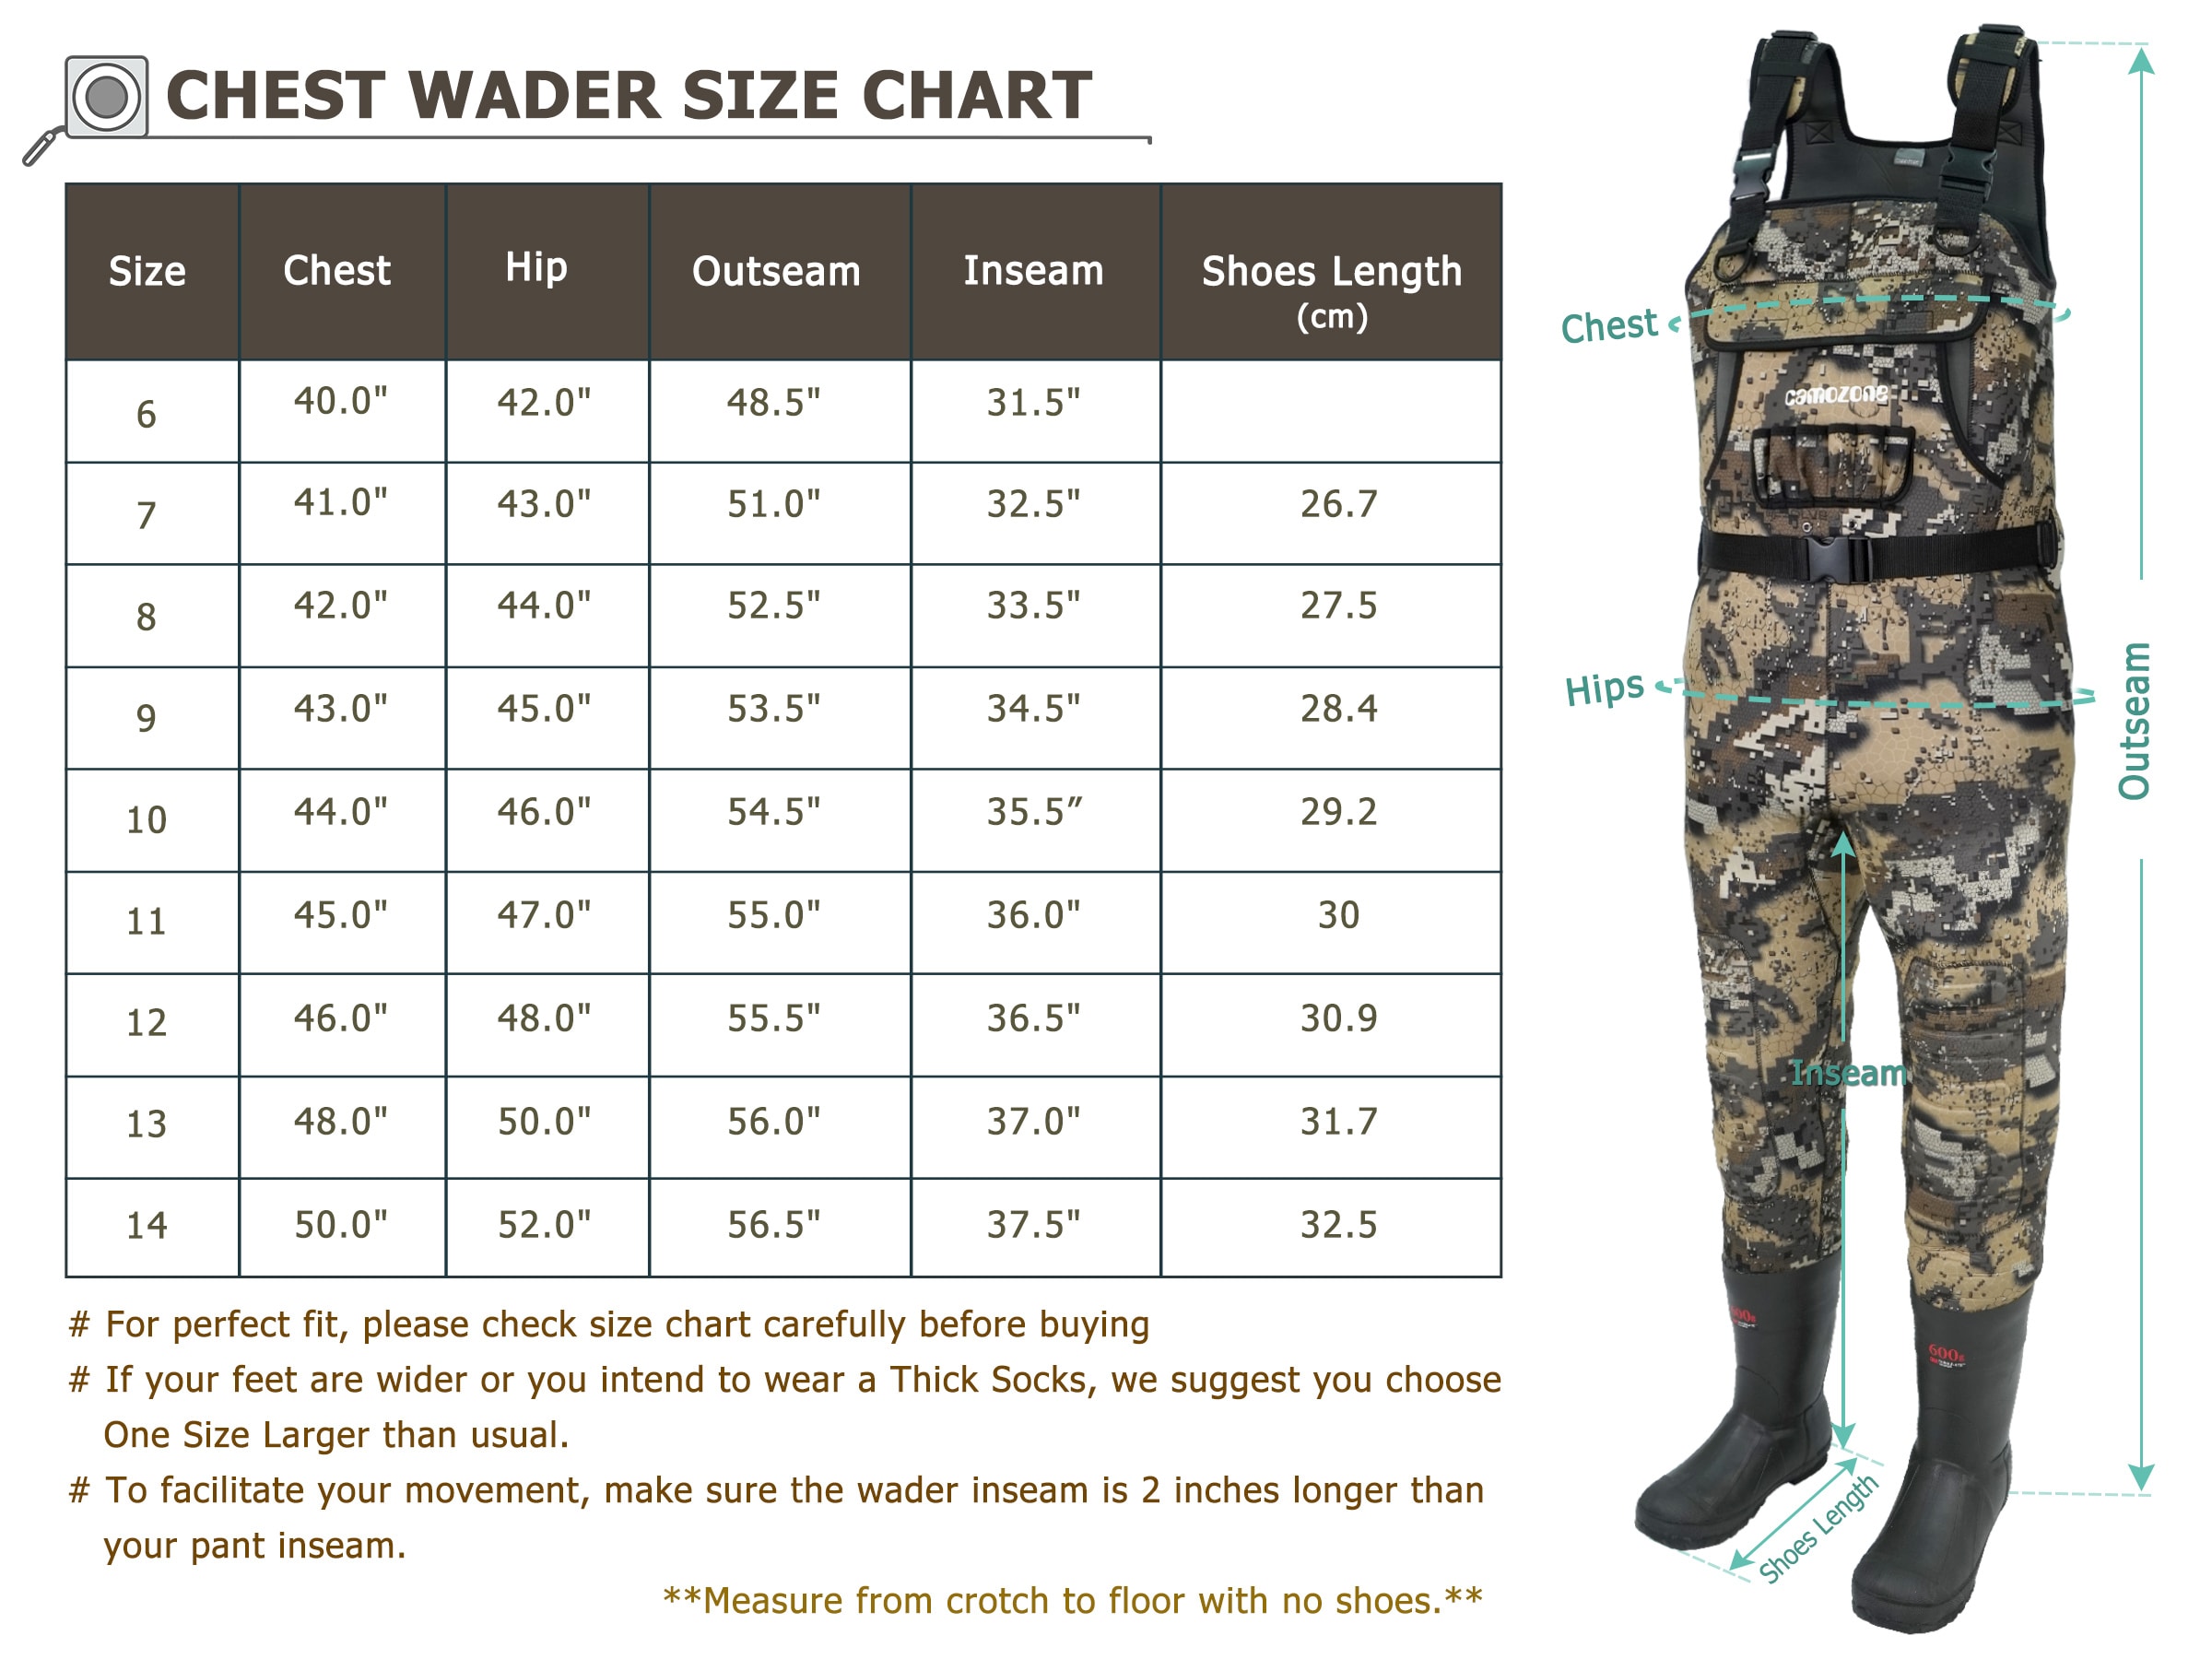 CAMOZONE Neoprene Chest Waders with Boots-size8 Unisex Fishing Jacket in  the Fishing Gear & Apparel department at